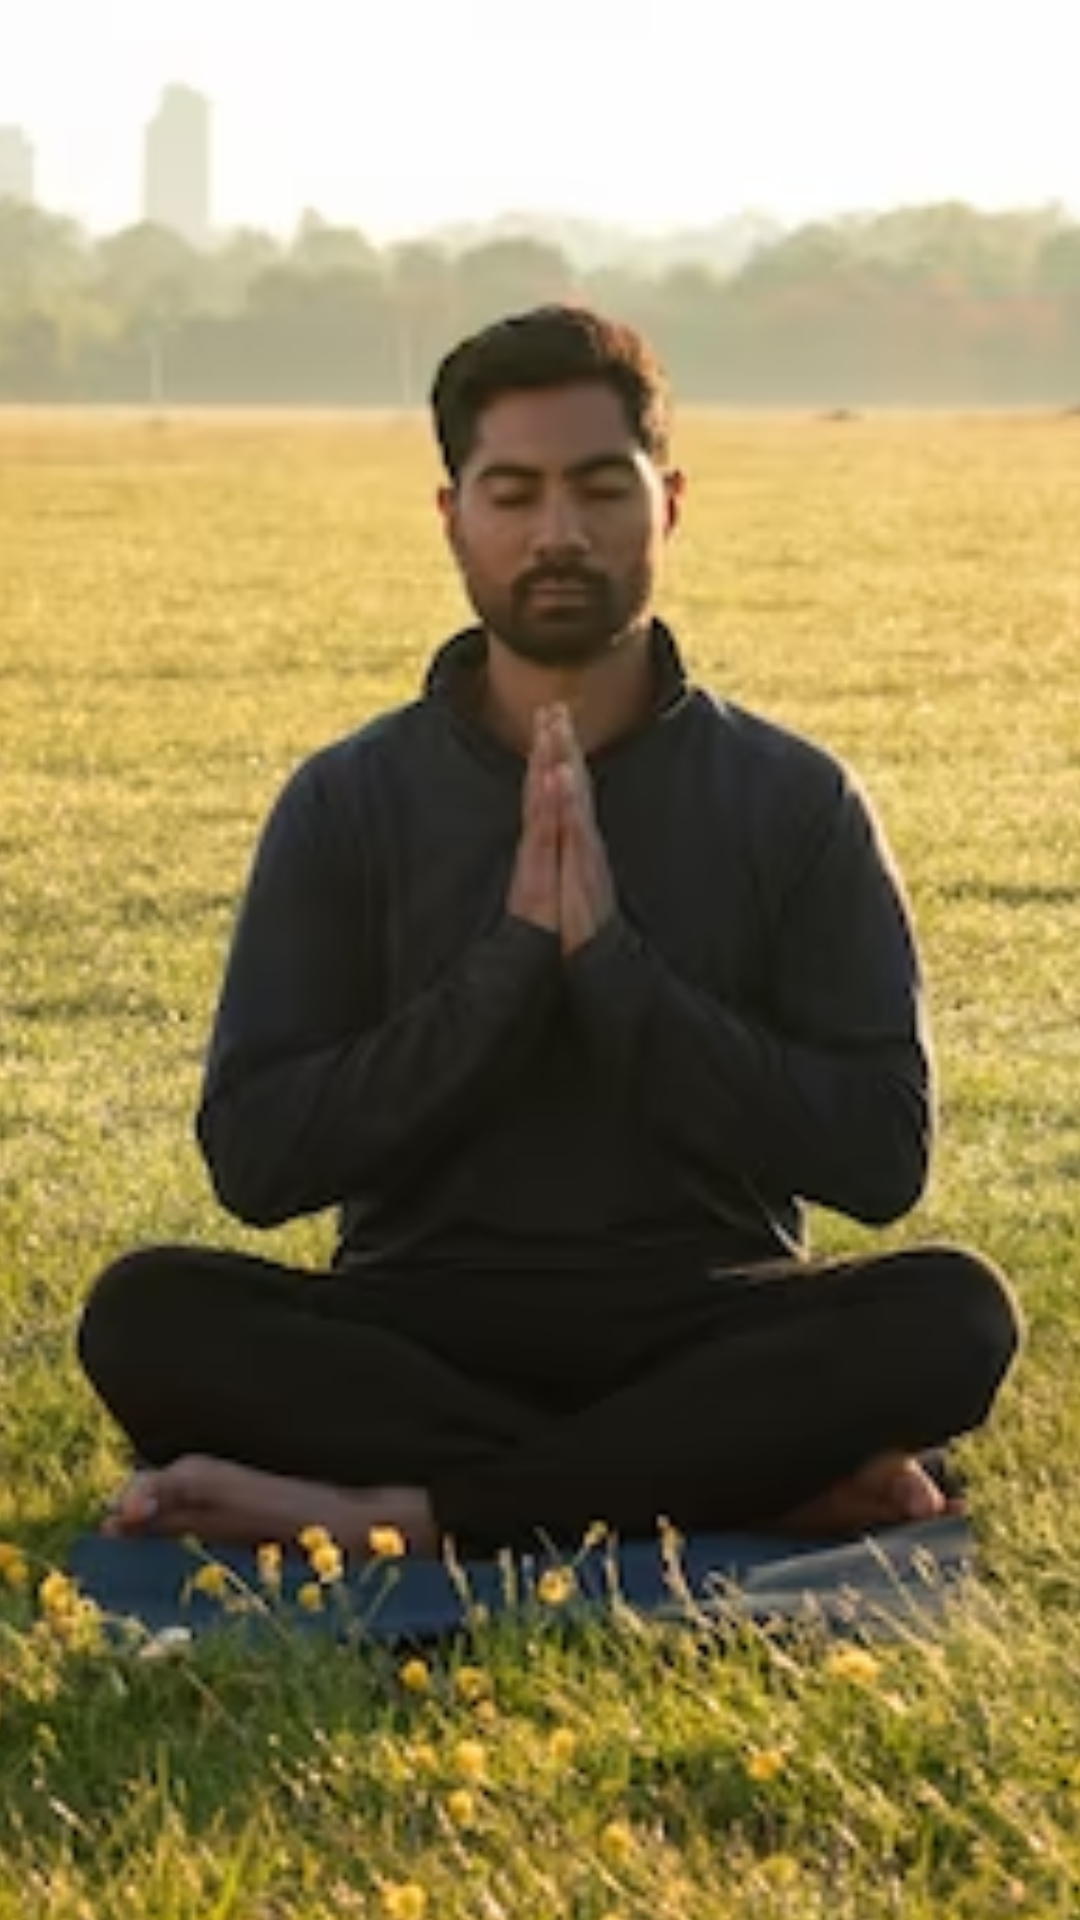 Meditation calms the body and brings peace. Here are different types of meditation you could try: